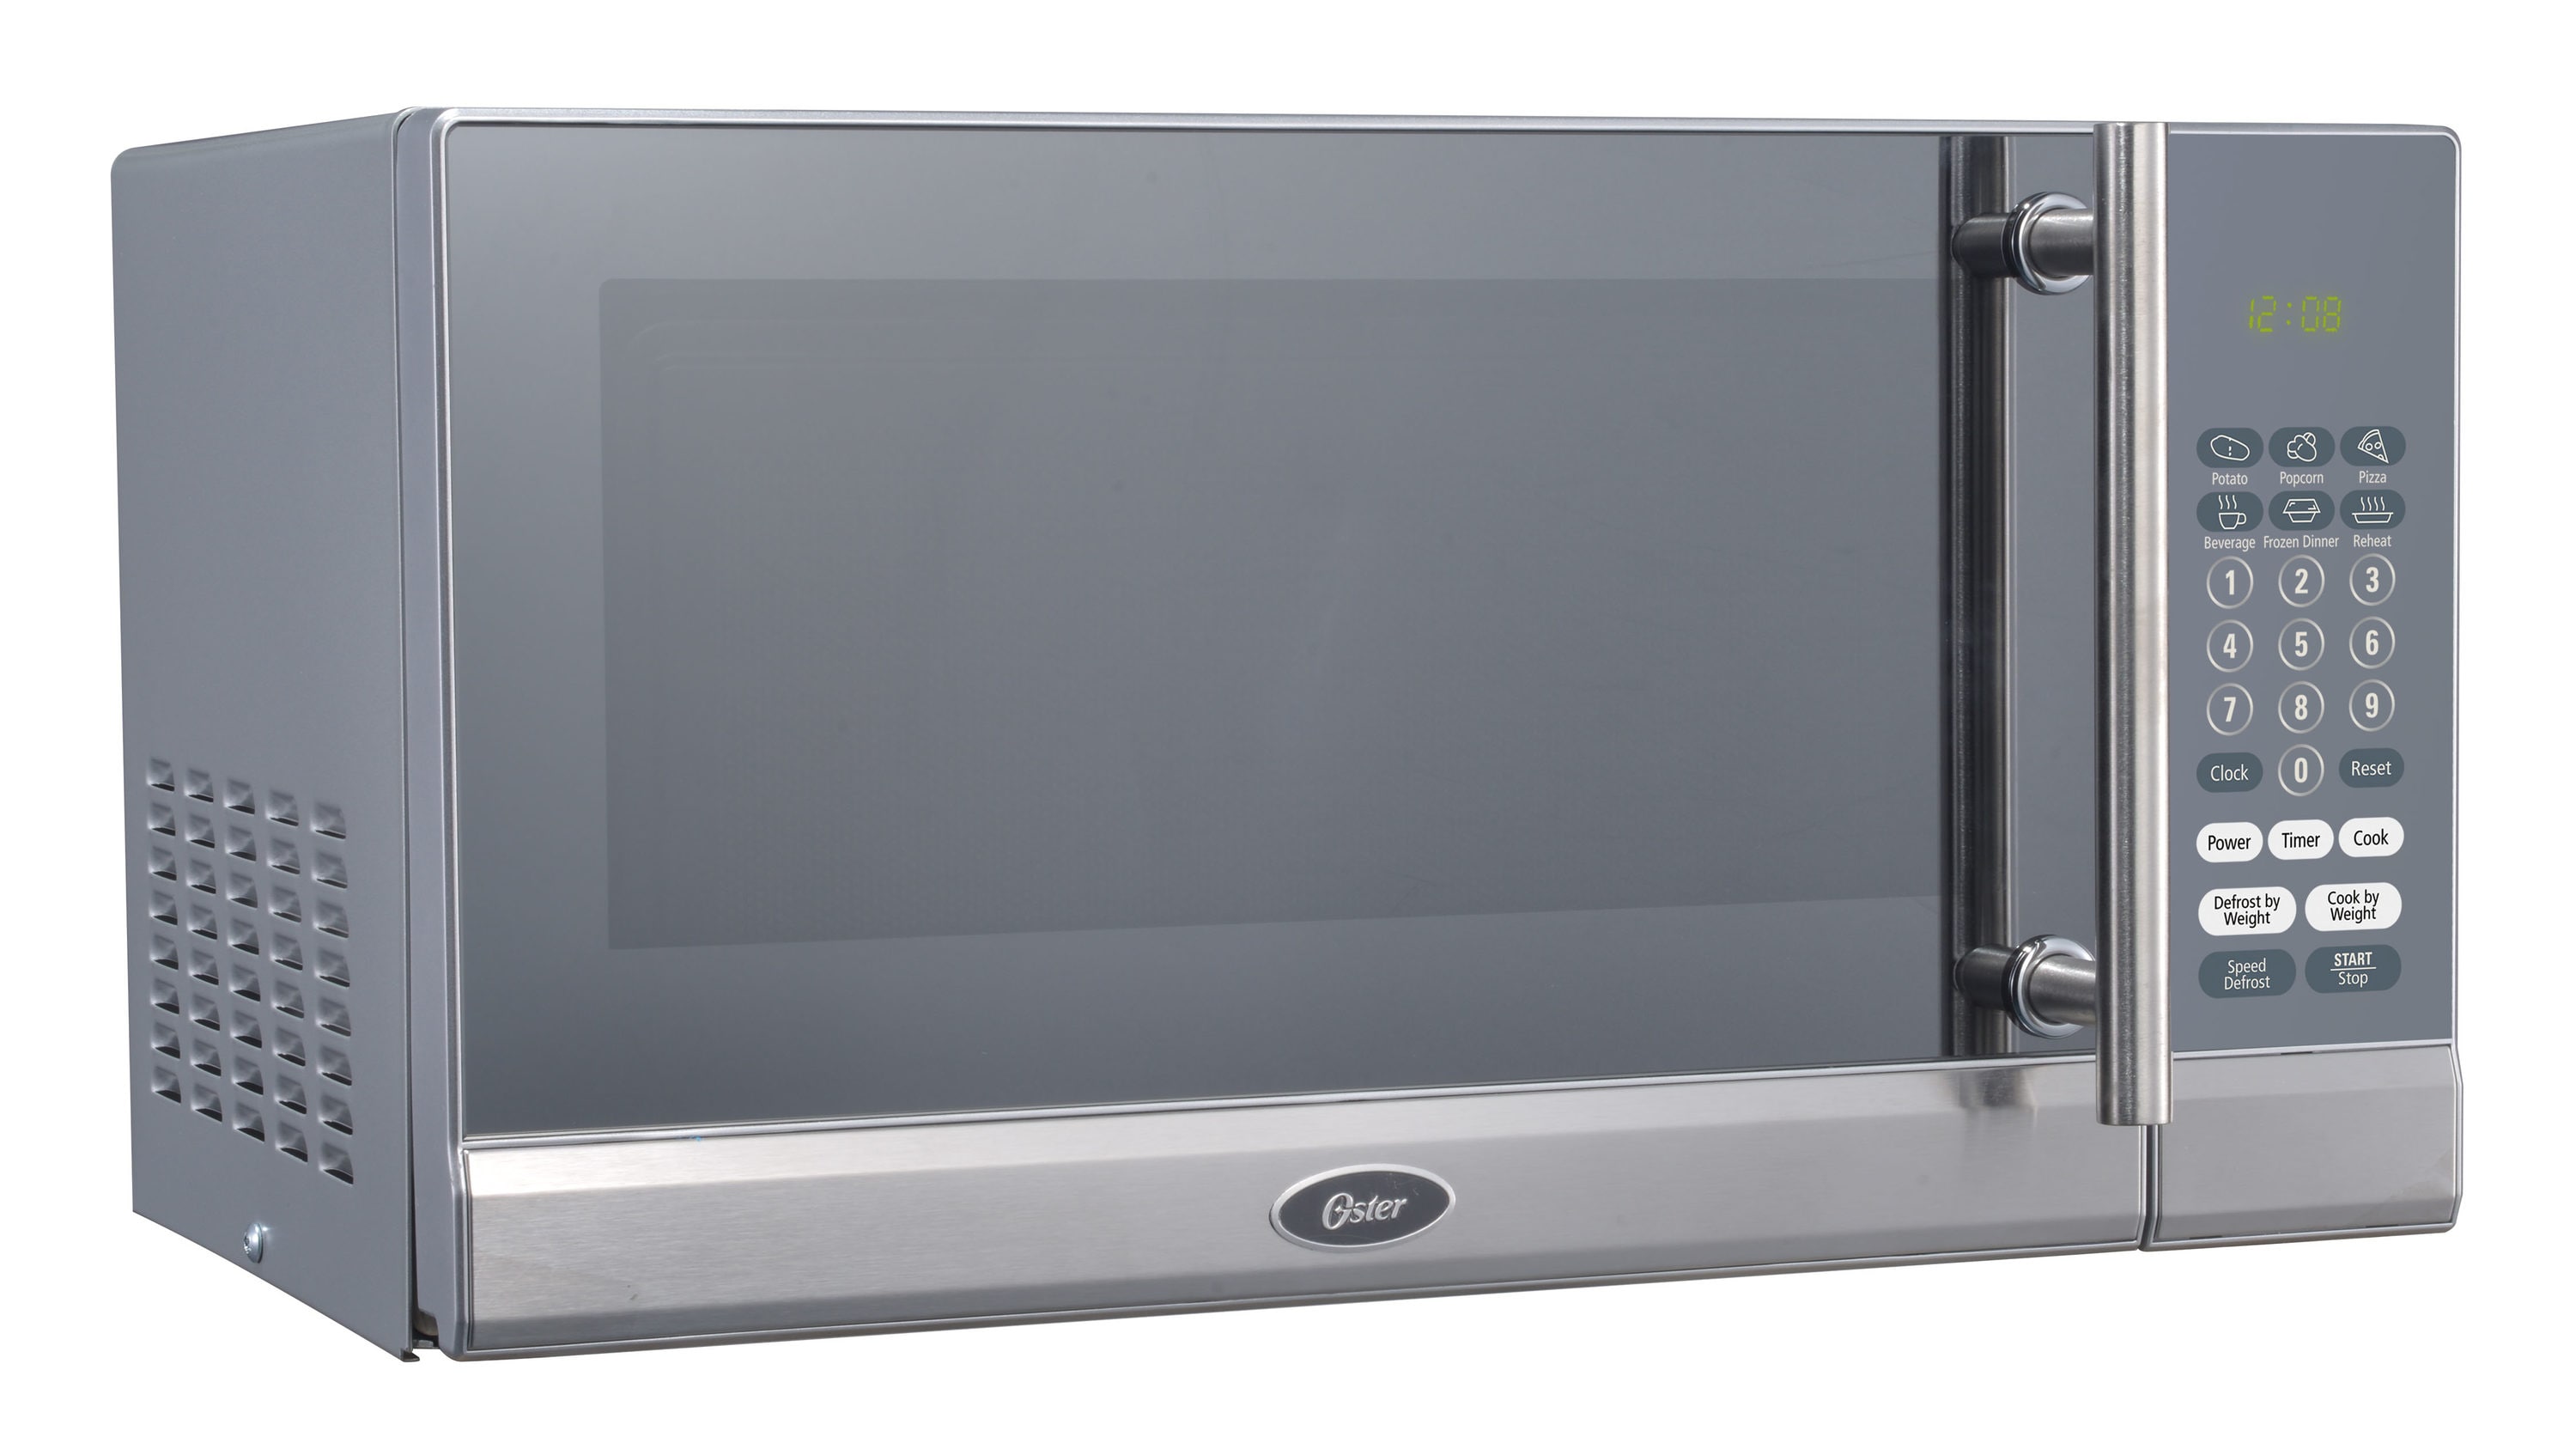 Oster EG034AL7-X1 Microwave Oven Review - Consumer Reports